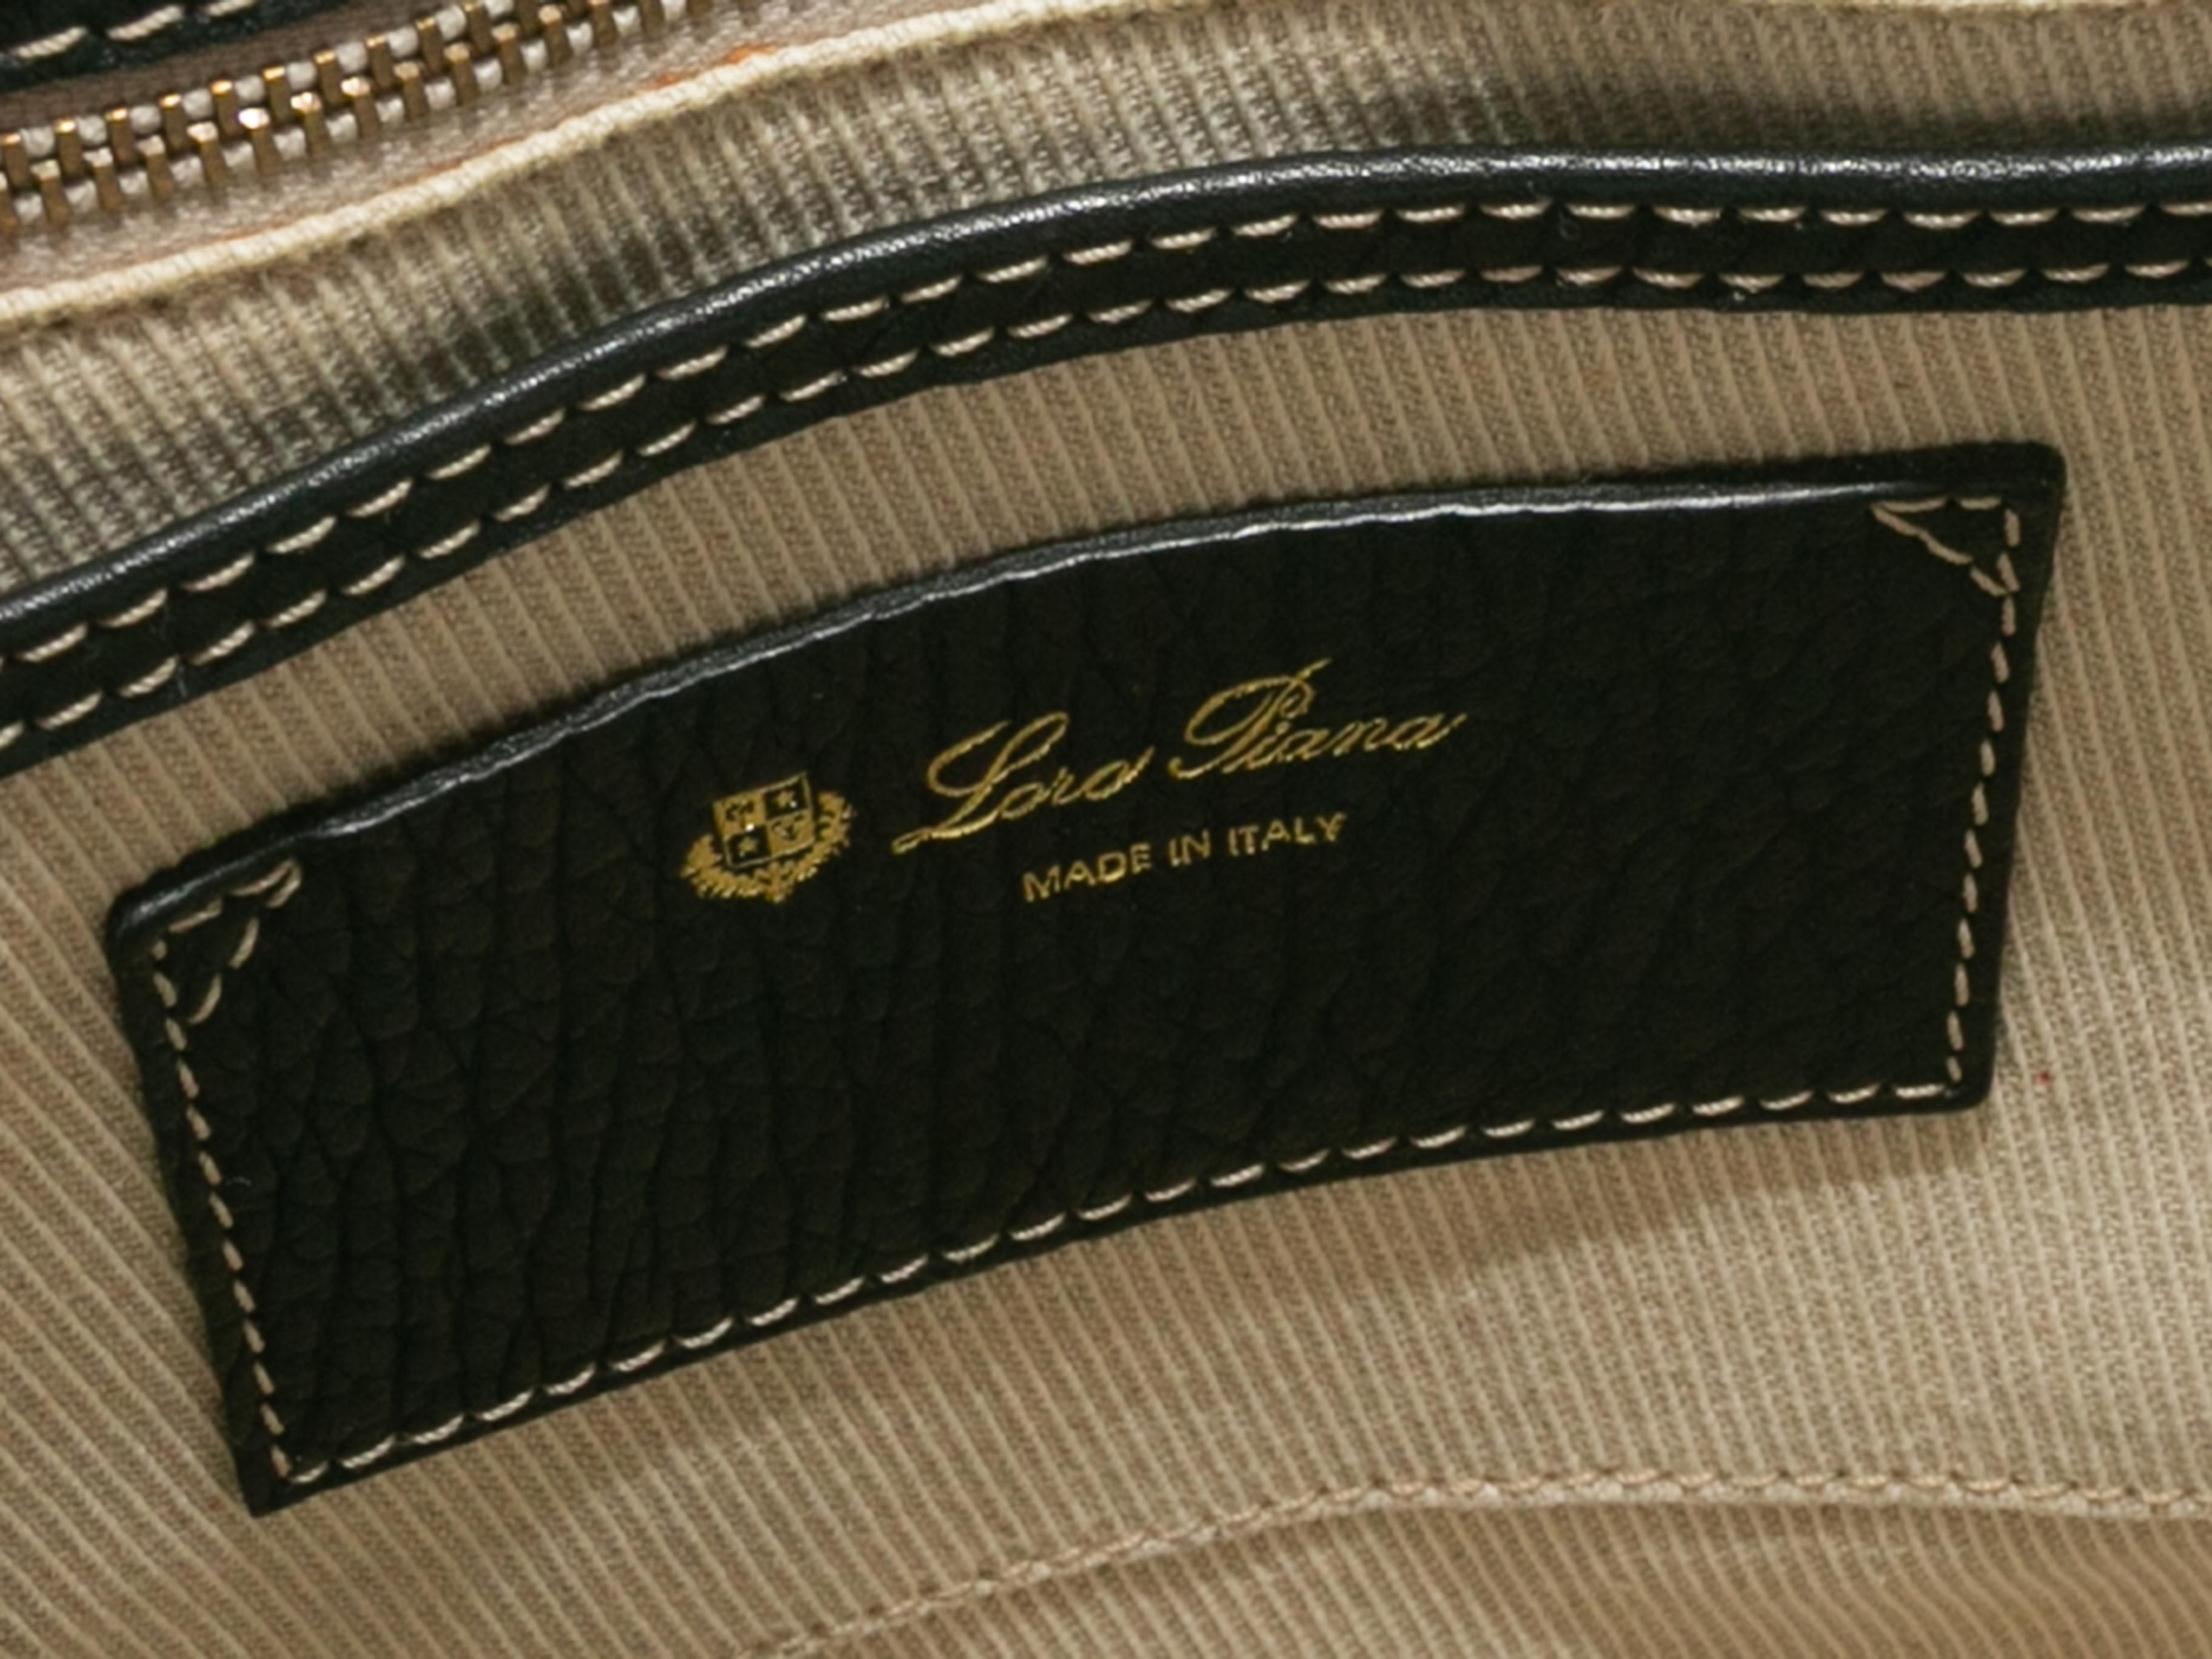 Product Details: Black Loro Piana Leather Handbag. This bag features a leather body, gold-tone hardware, dual rolled top handles, contrast stitching, and front clasp closure. 11.5